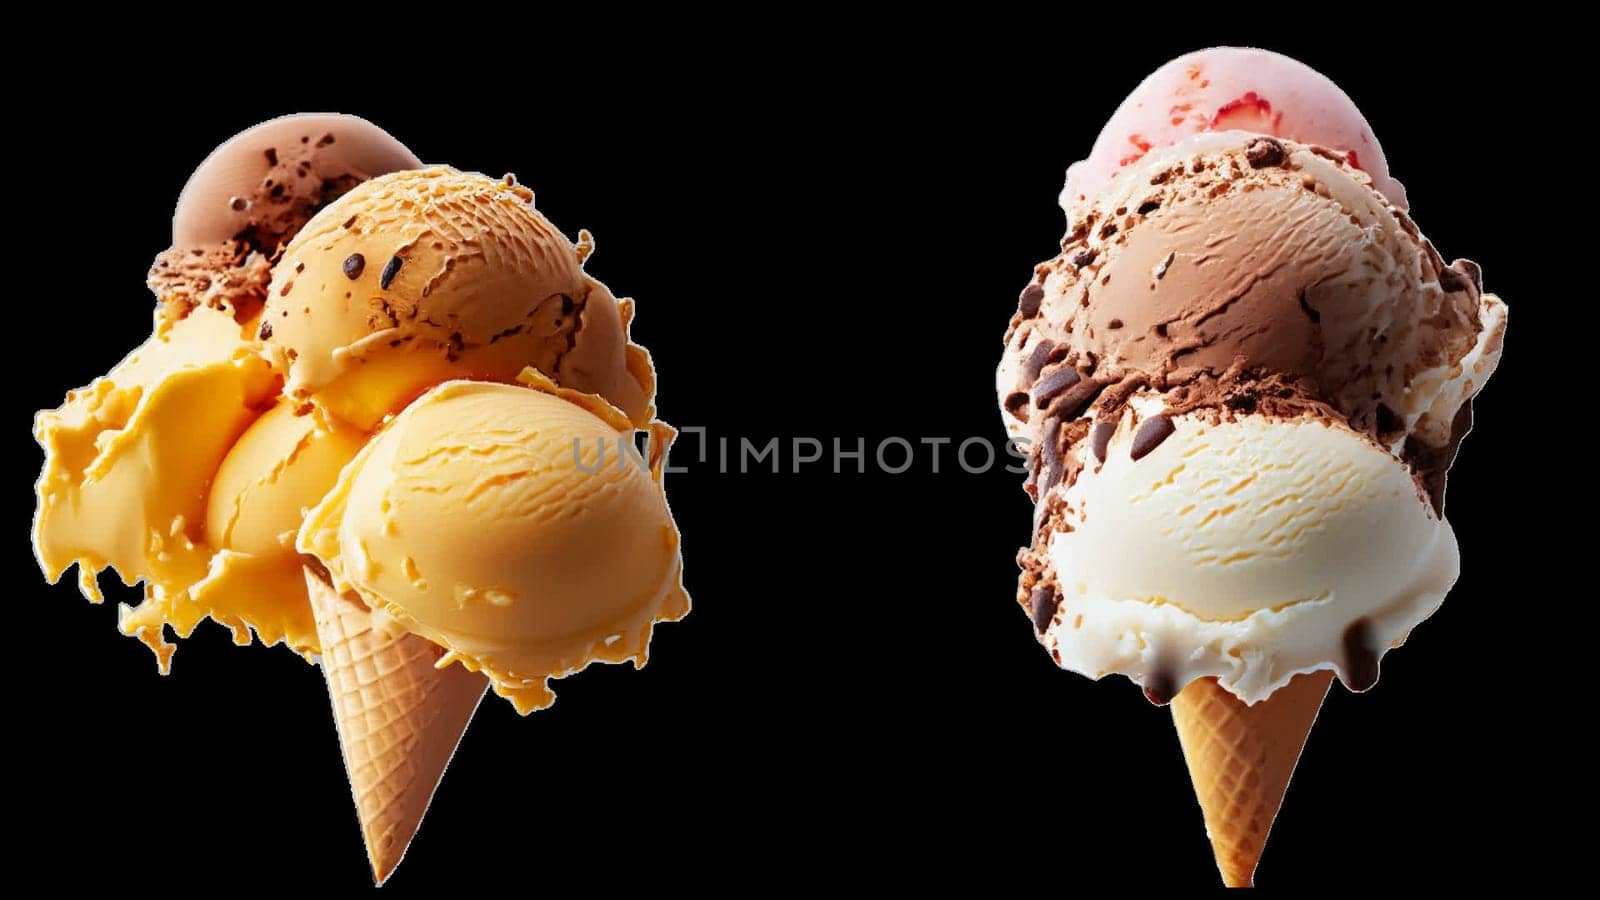 explosion of Ice Cream. Summer time. 3D illustration, 3D rendering. futuristic realistic 3d creative concept design, illustration. format png by Costin